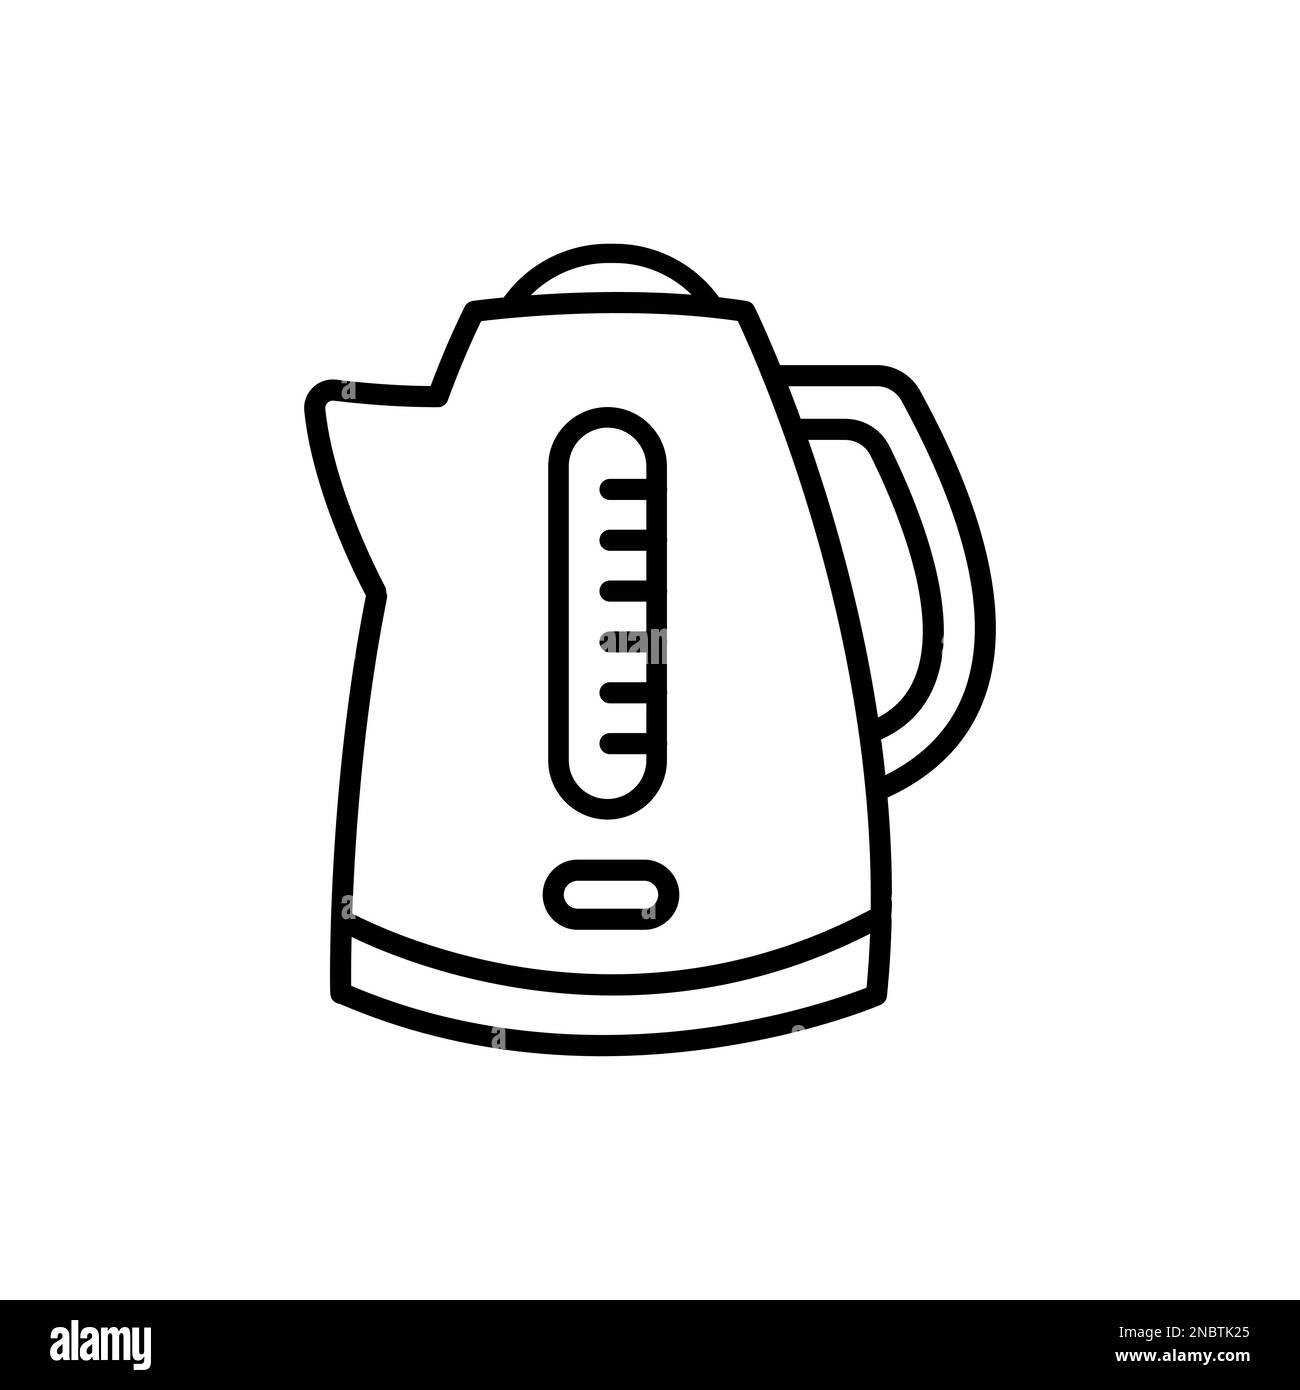 Electric kettle icon. Simple vector illustration isolated on a white background. Stock Vector